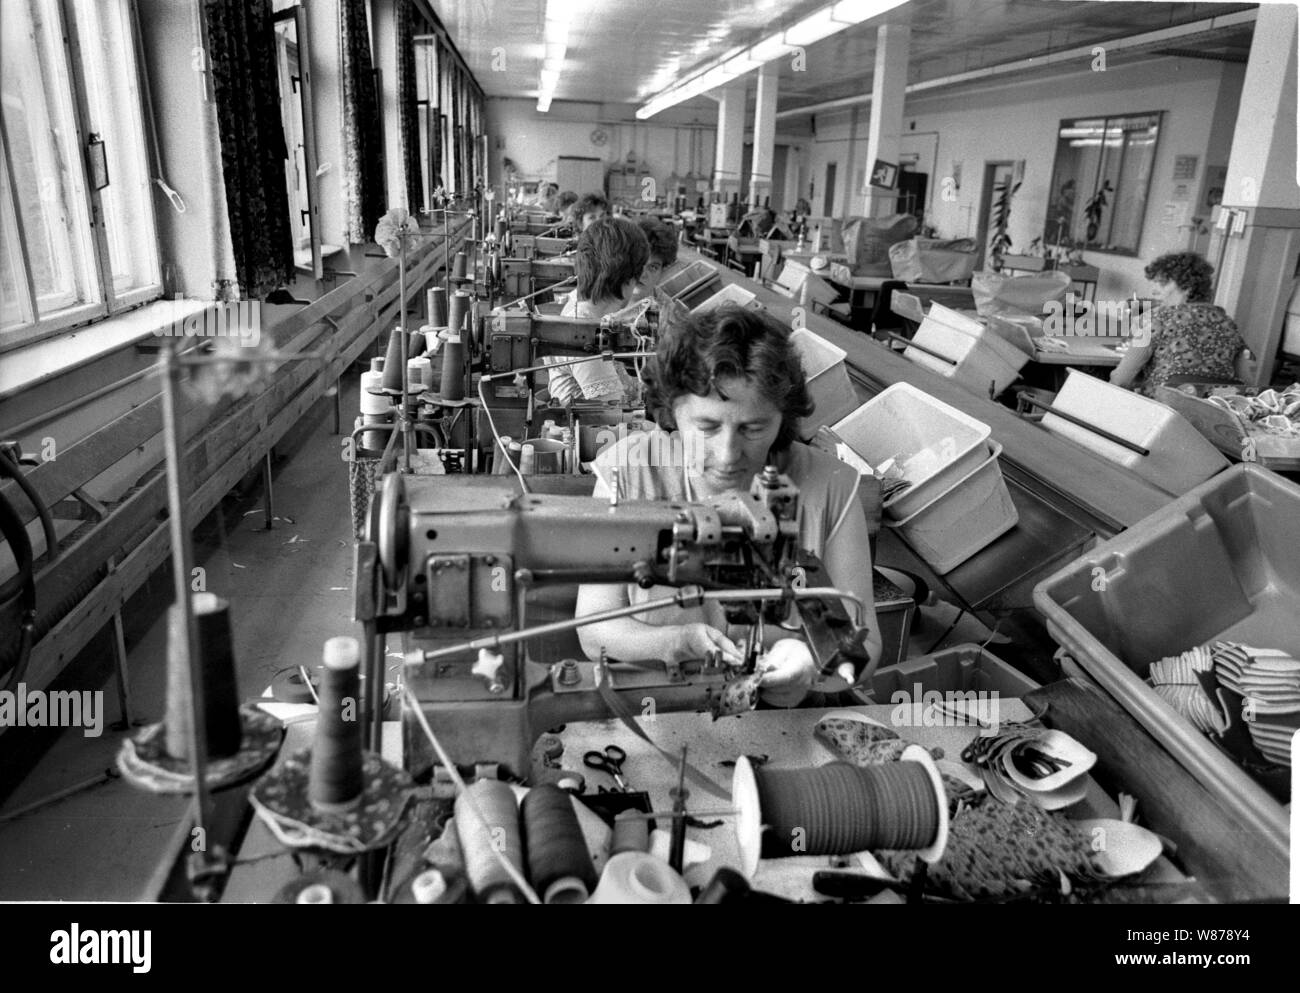 01 January 1990, Berlin, Luckenwalde: The Luckenwalder shoe factory produced sports shoes for the Soviet Union. The company was not for sale in 1990. The photo shows how small the workplaces were automated, low productivity. Best possible image quality, exact shooting date unknown. Photo: Paul Glaser/dpa-Zentralbild/ZB Stock Photo